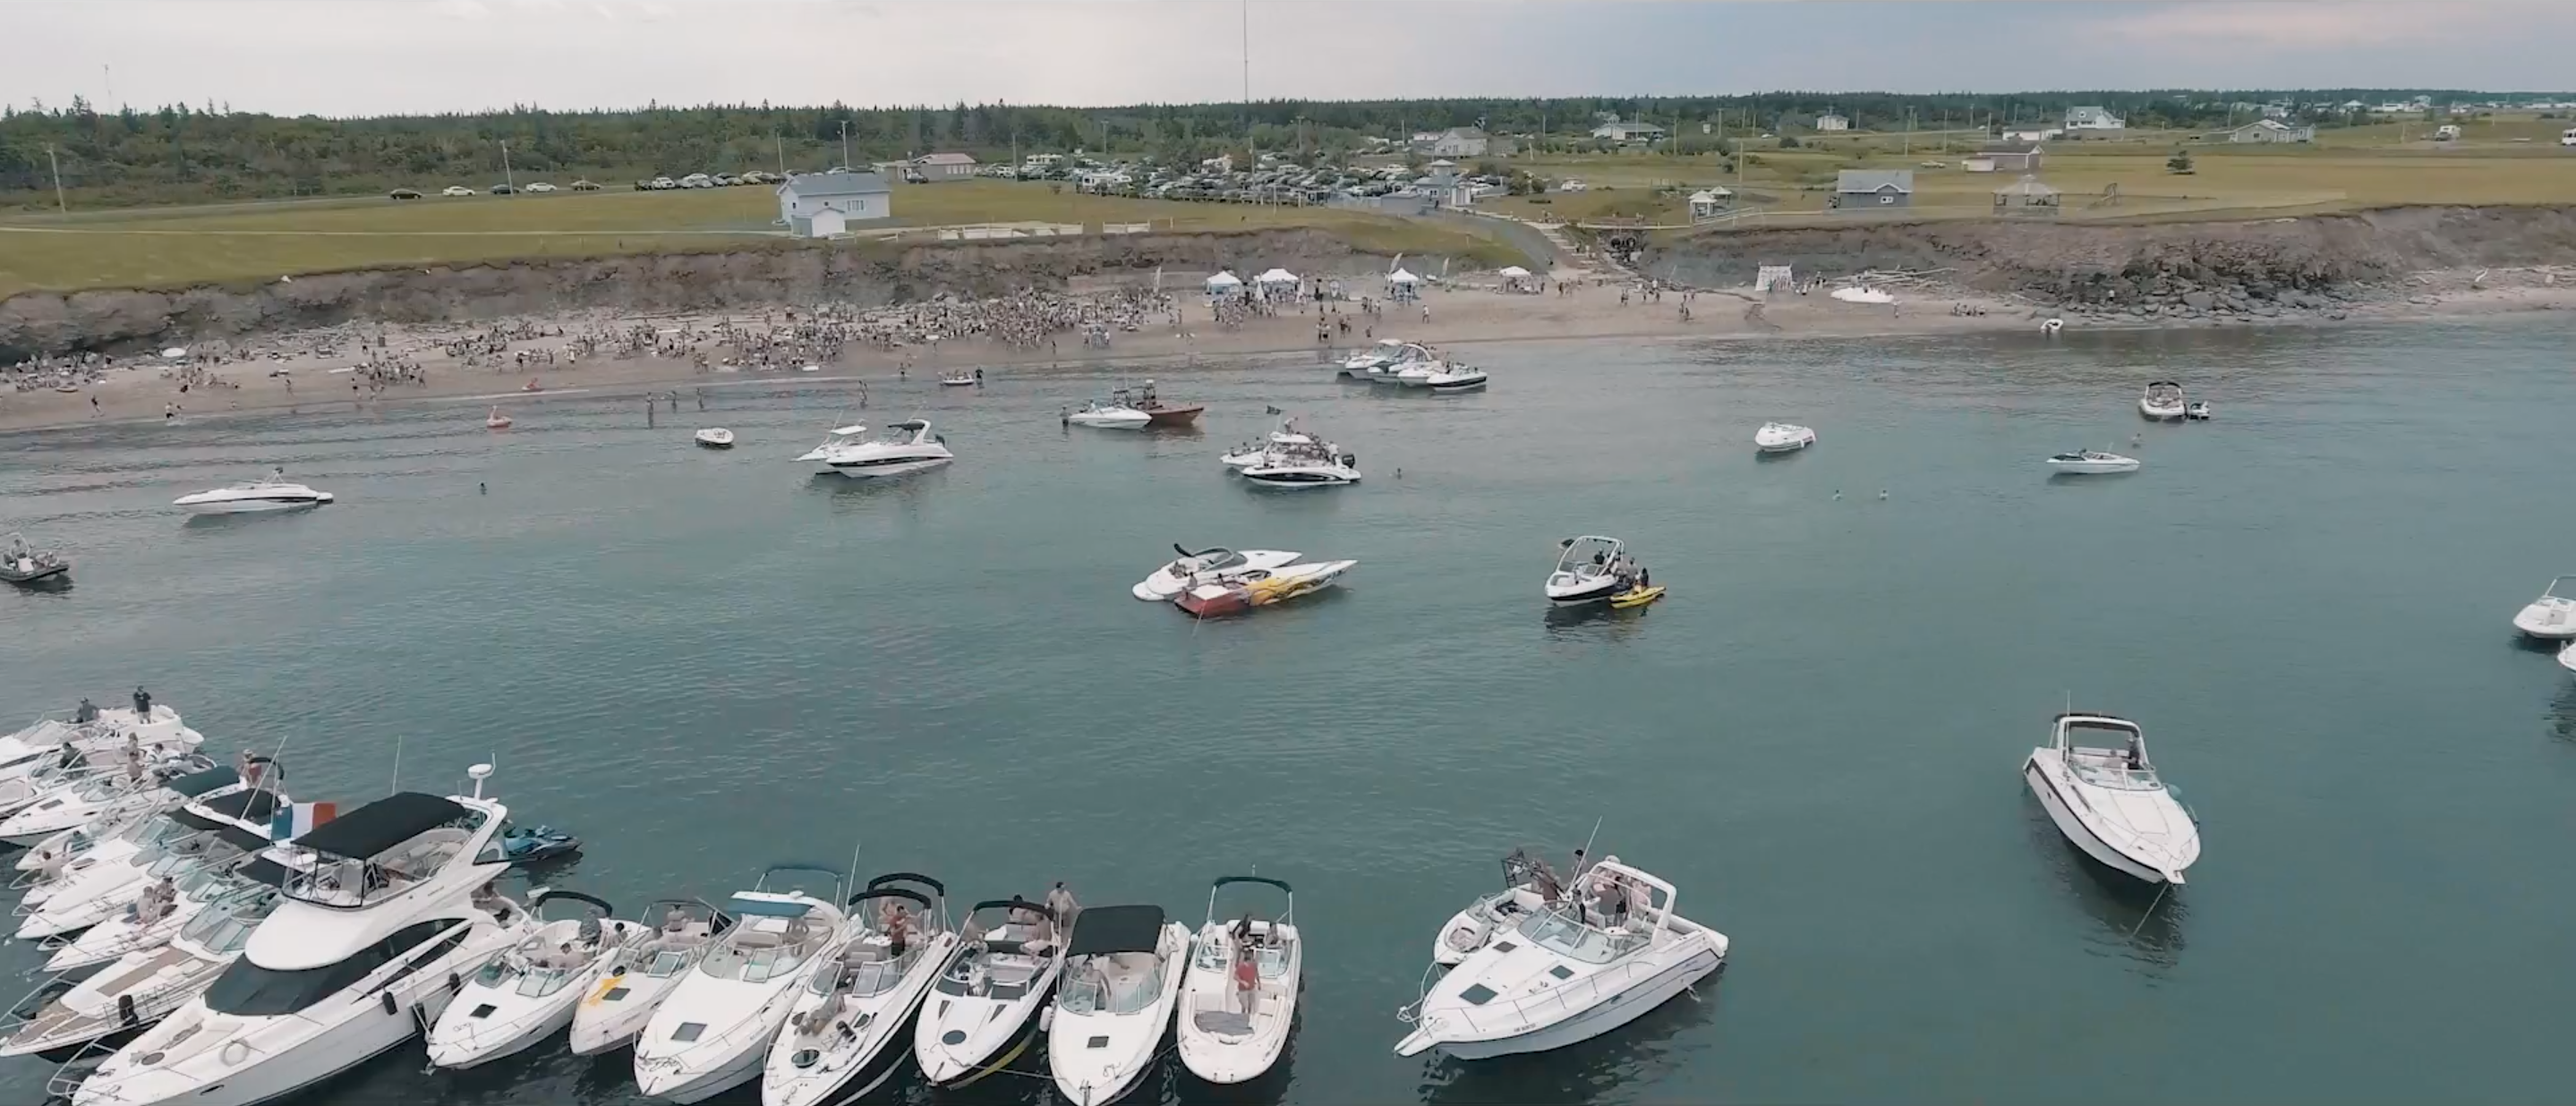 Beach Party Acadien - Promotional Video 2018